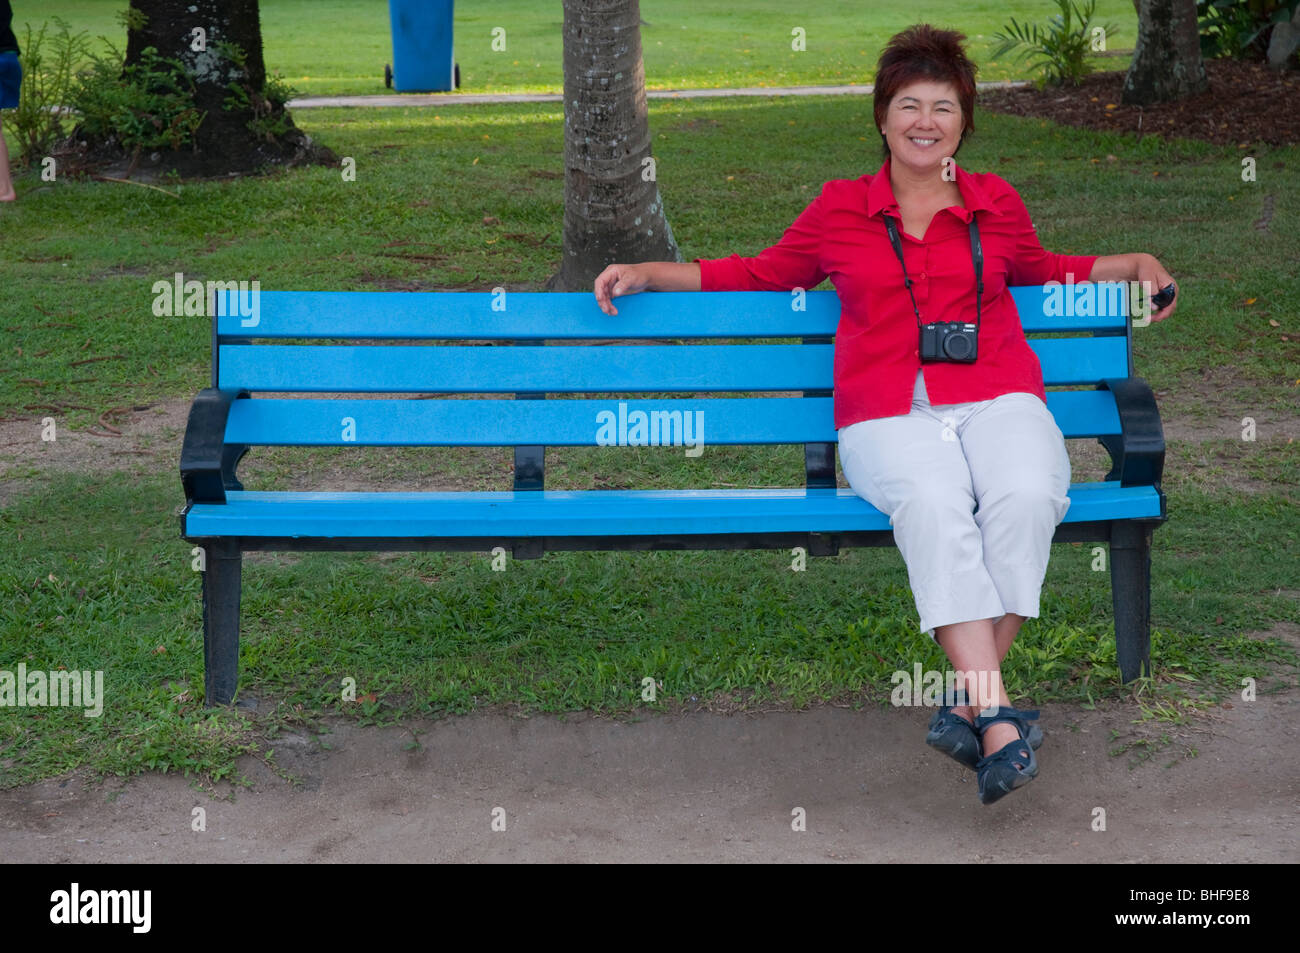 A mature woman in a red shirt on holiday sitting on a blue bench with a Canon G11 camera Stock Photo